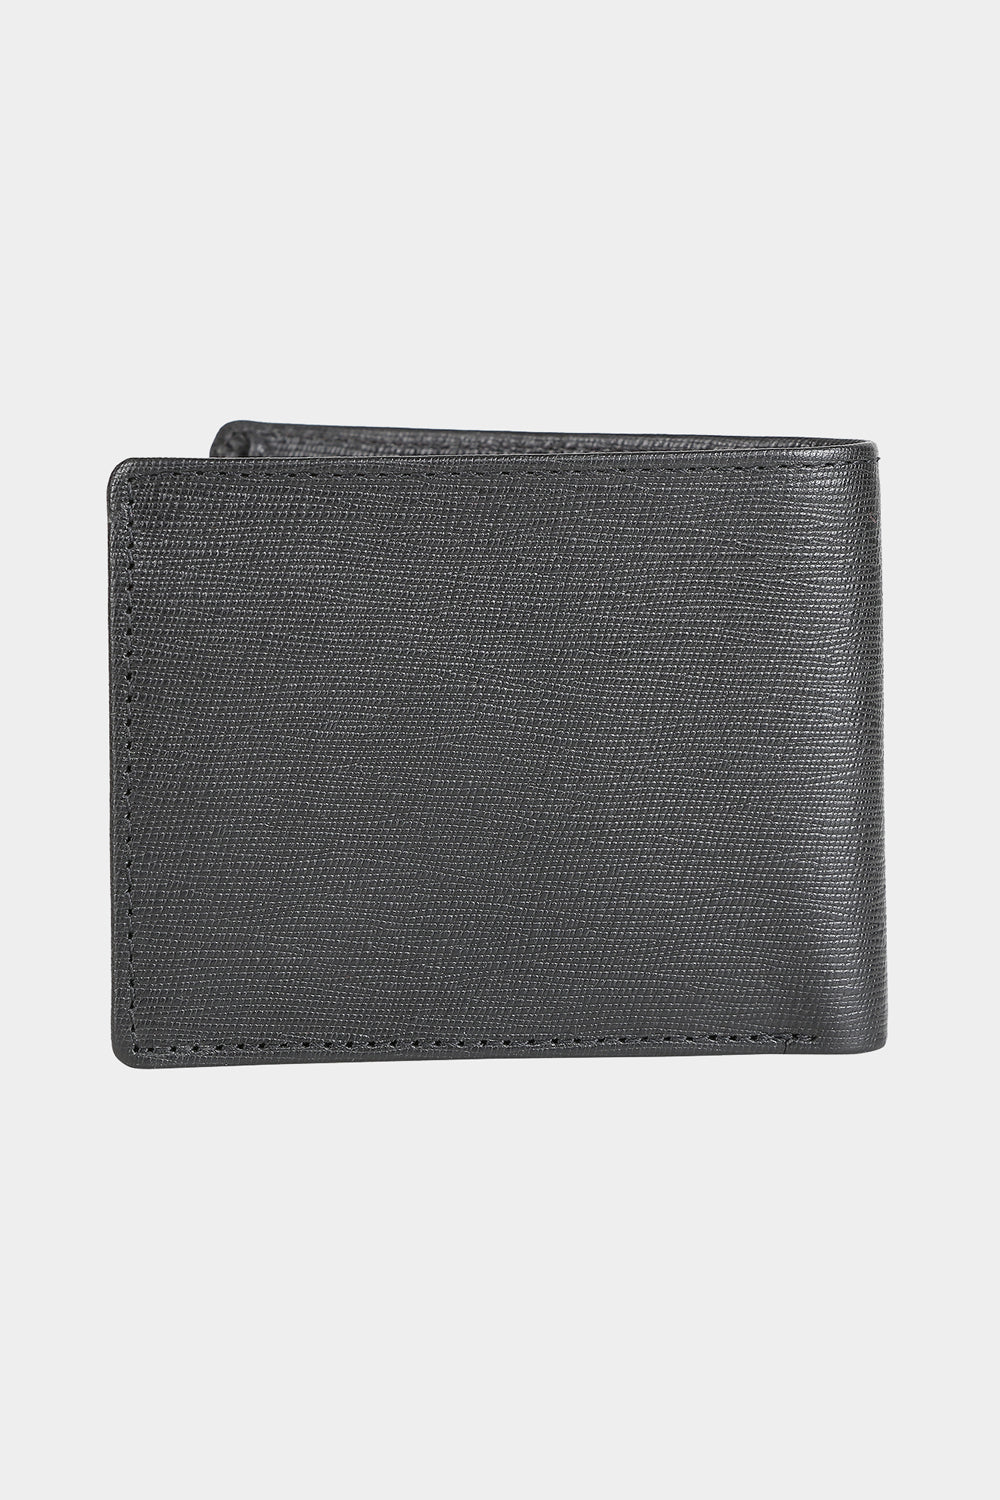 Justanned Saffiano Wallet